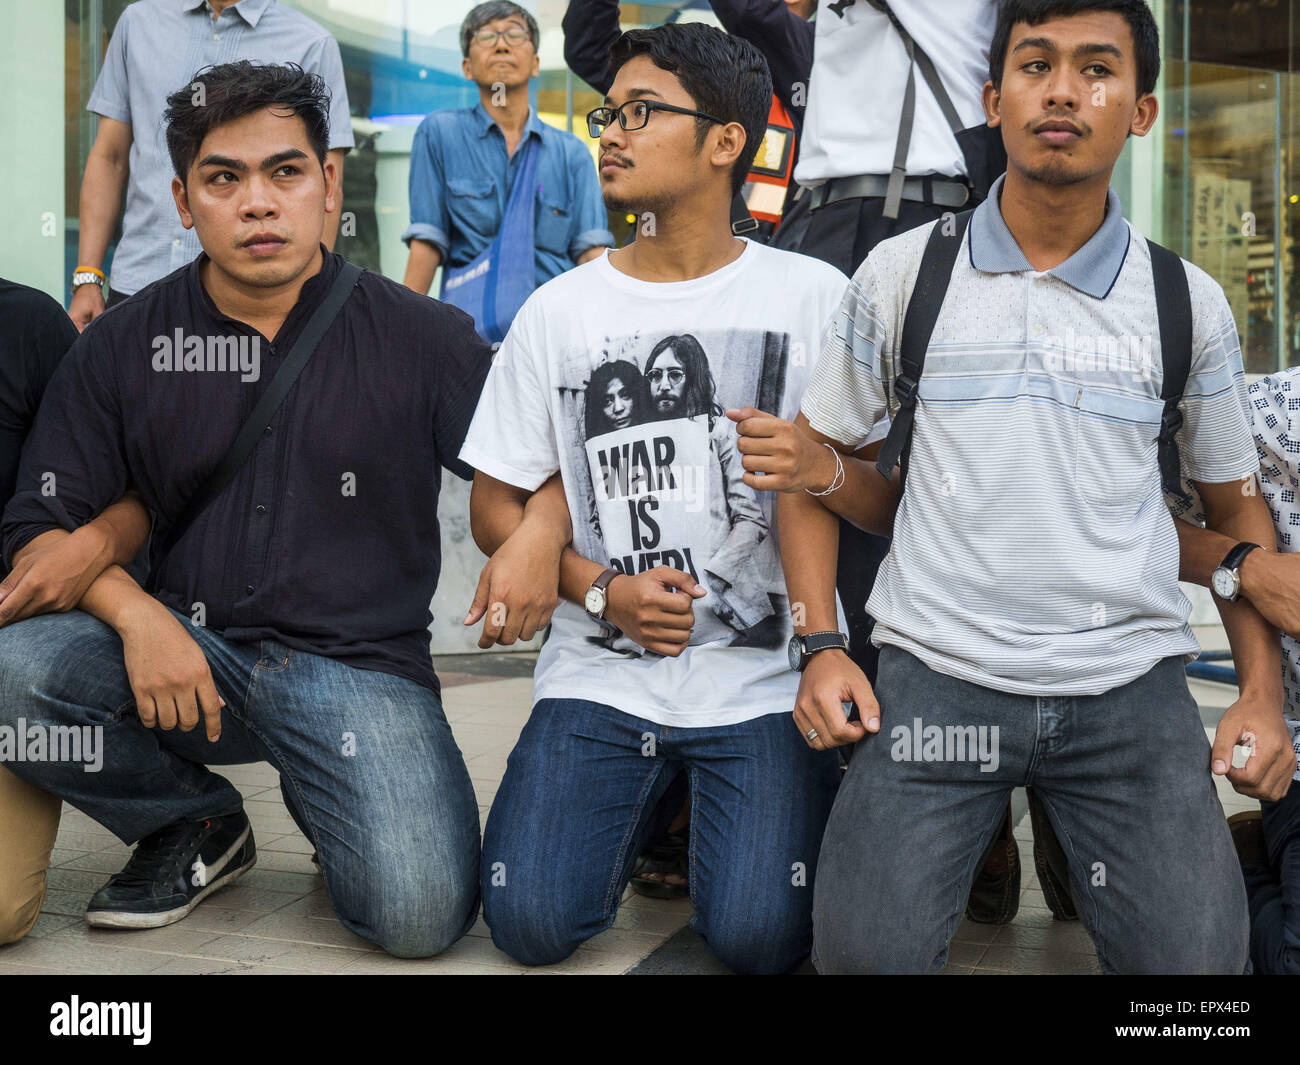 Bangkok, Thailand. 22nd May, 2015. Anti-coup protestors lock arms during a protest in front of the Bangkok Art and Culture Centre Friday evening. The Thai military seized power in a coup on May 22, 2014. There were small protests throughout Bangkok Friday to mark the first anniversary of the coup. Police arrested protestors at several locations. The most serious protest was at Bangkok Art and Culture Centre (BACC) where about 100 protestors, mostly students, faced off against police for several hours. Credit:  ZUMA Press, Inc./Alamy Live News Stock Photo